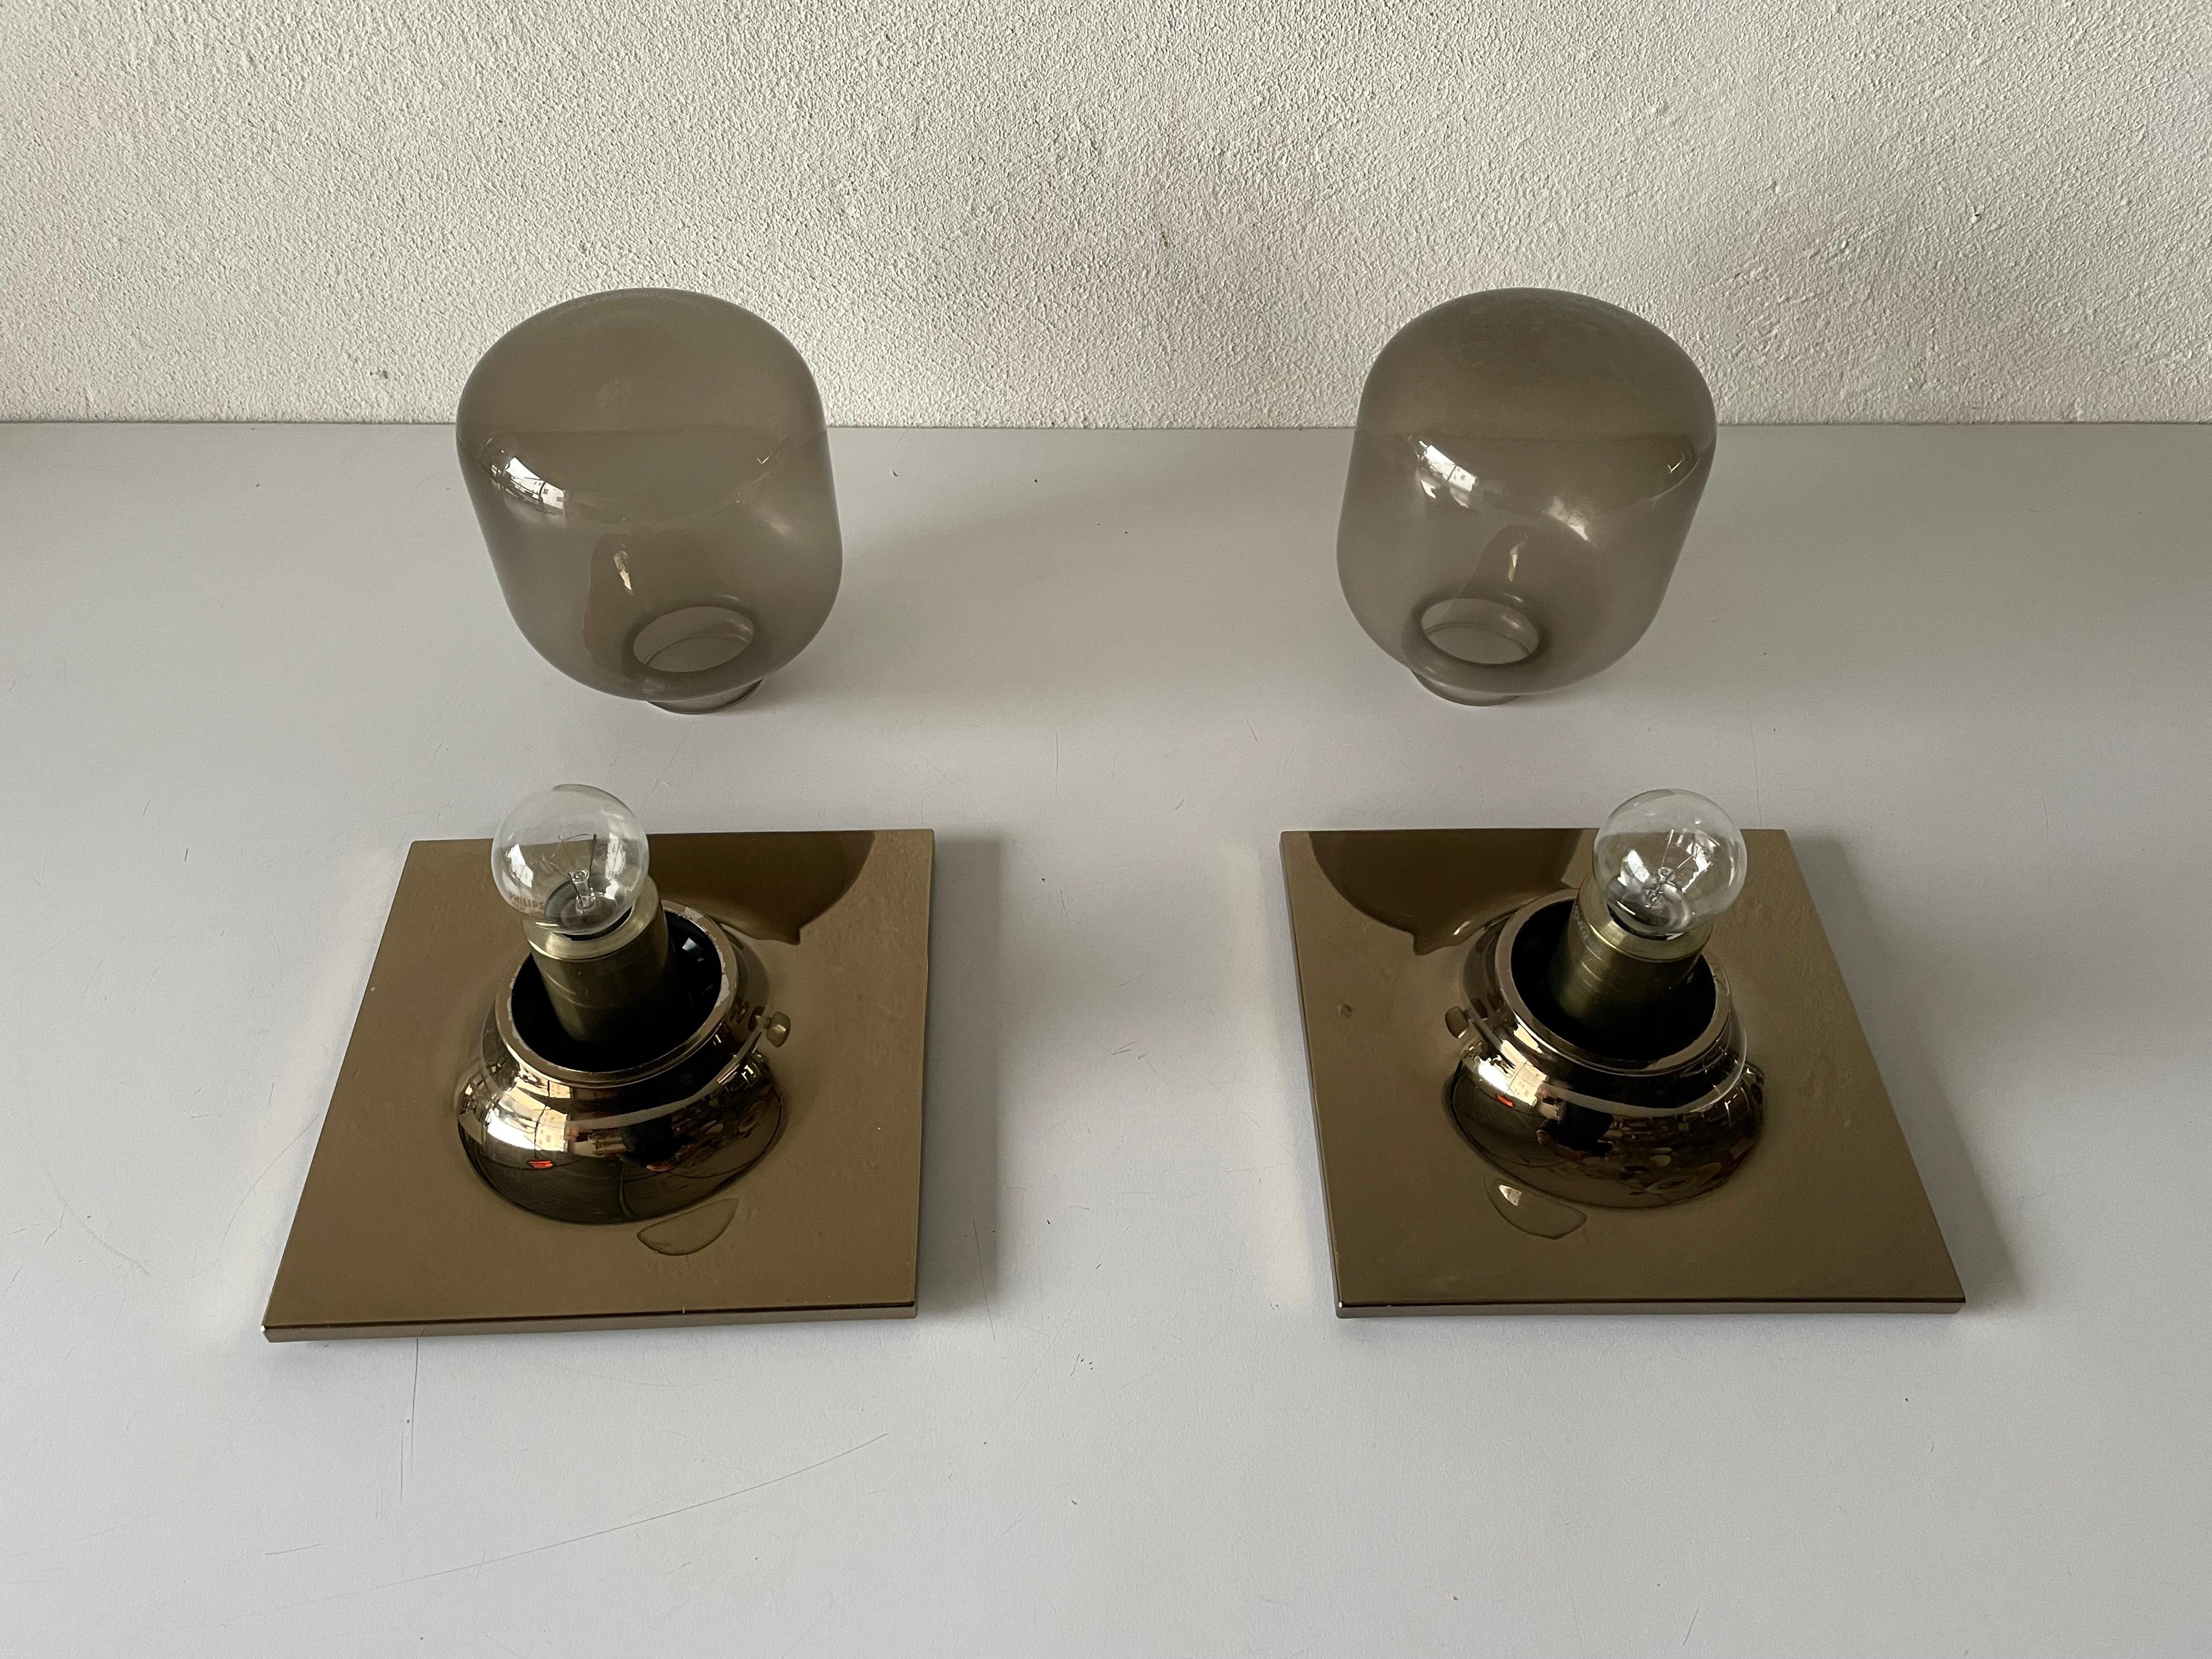 Pair of Wall or Ceiling Lamps by Motoko Ishii for Staff, 1960s, Germany 2